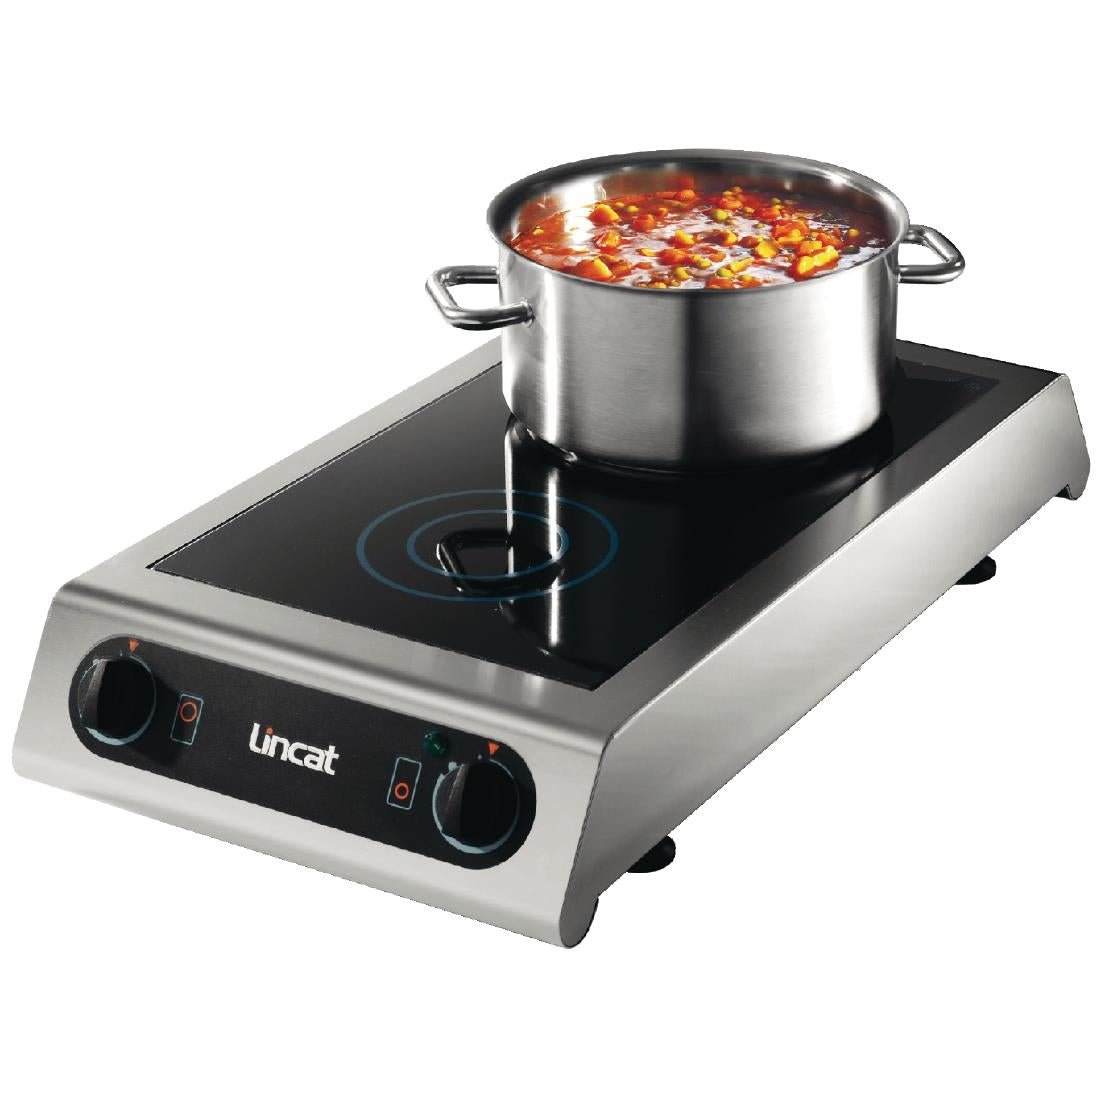 IH21 - Lincat Electric Counter-top Induction Hob - 2 Zones - W 350 mm - 3.0 kW DK977 JD Catering Equipment Solutions Ltd